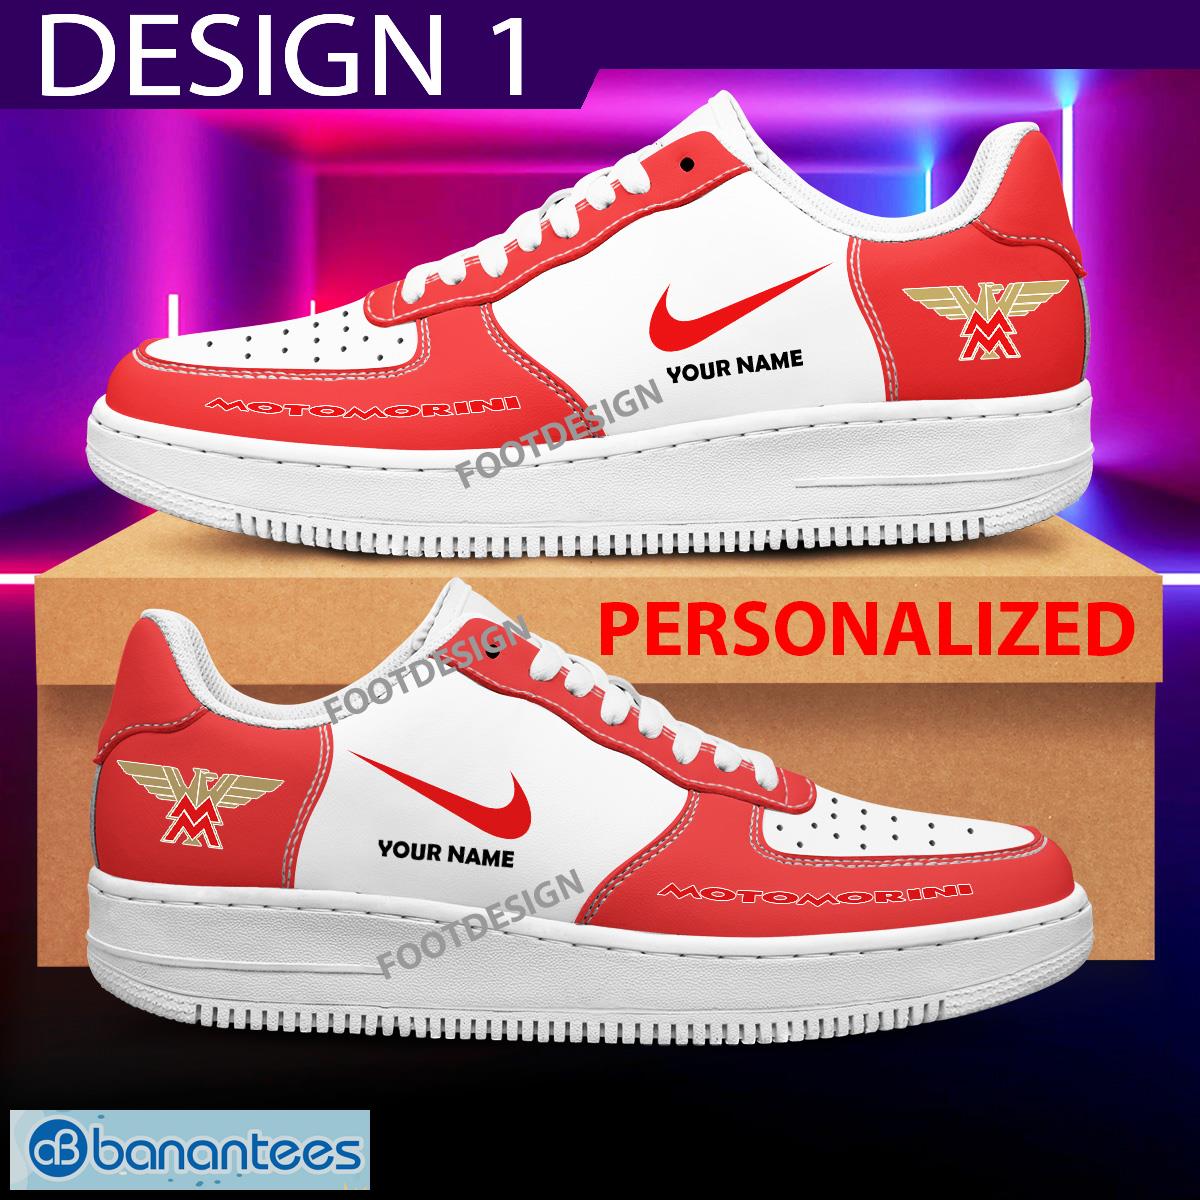 Moto Morini Motorcycle Air Force 1 Shoes Personalized Gift AF1 Sneaker For Men Women - Moto Morini Motorcycle Air Force 1 Shoes Personalized Photo 1